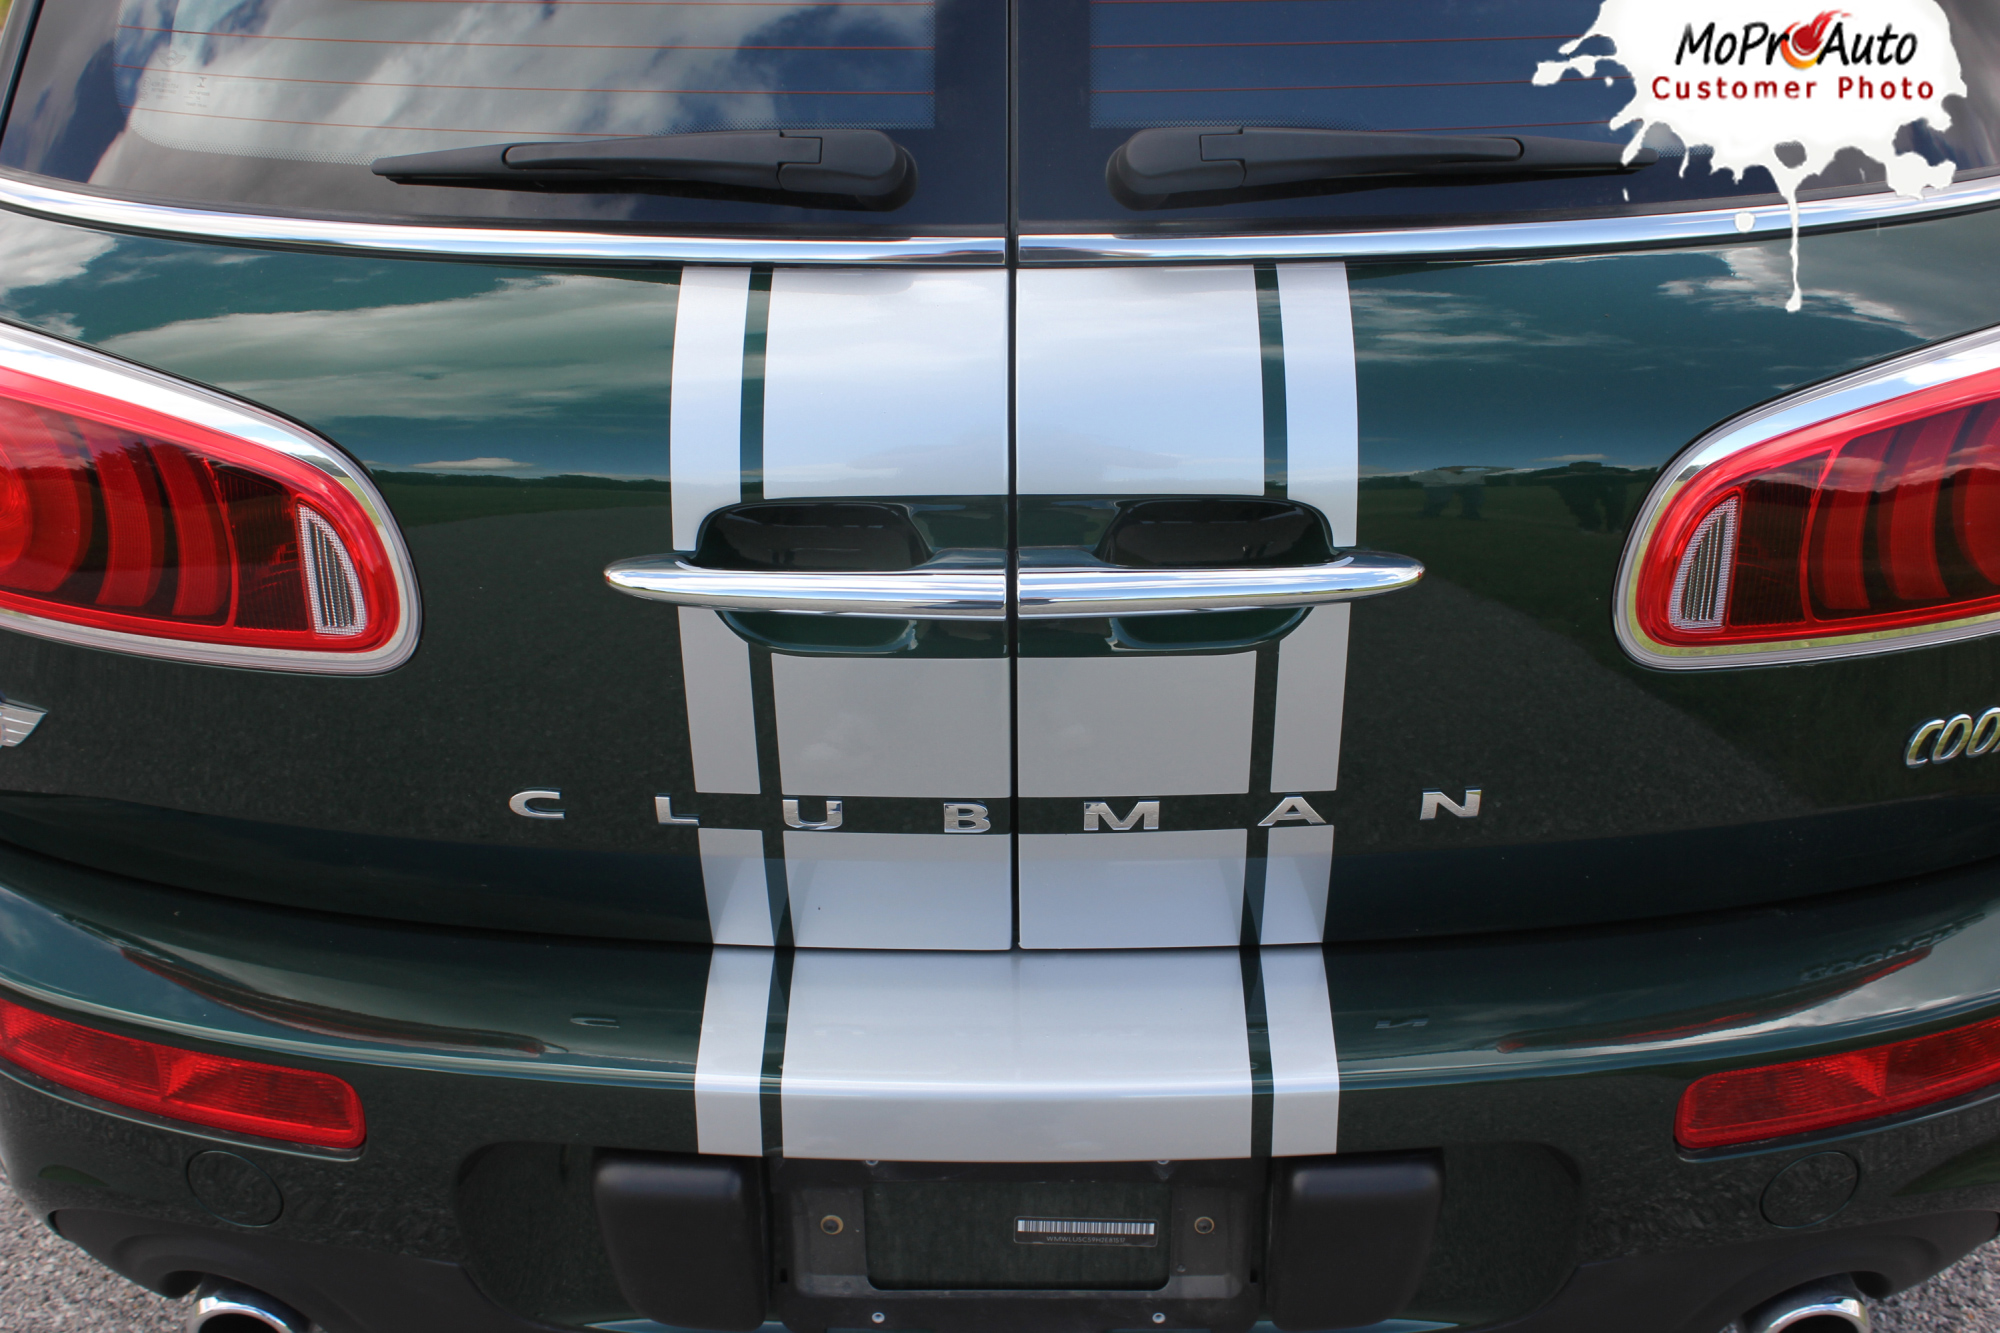 Mini Cooper CLUBMAN S-TYPE HOOD CENTER STRIPES Vinyl Graphics Stripes and Decals Kit